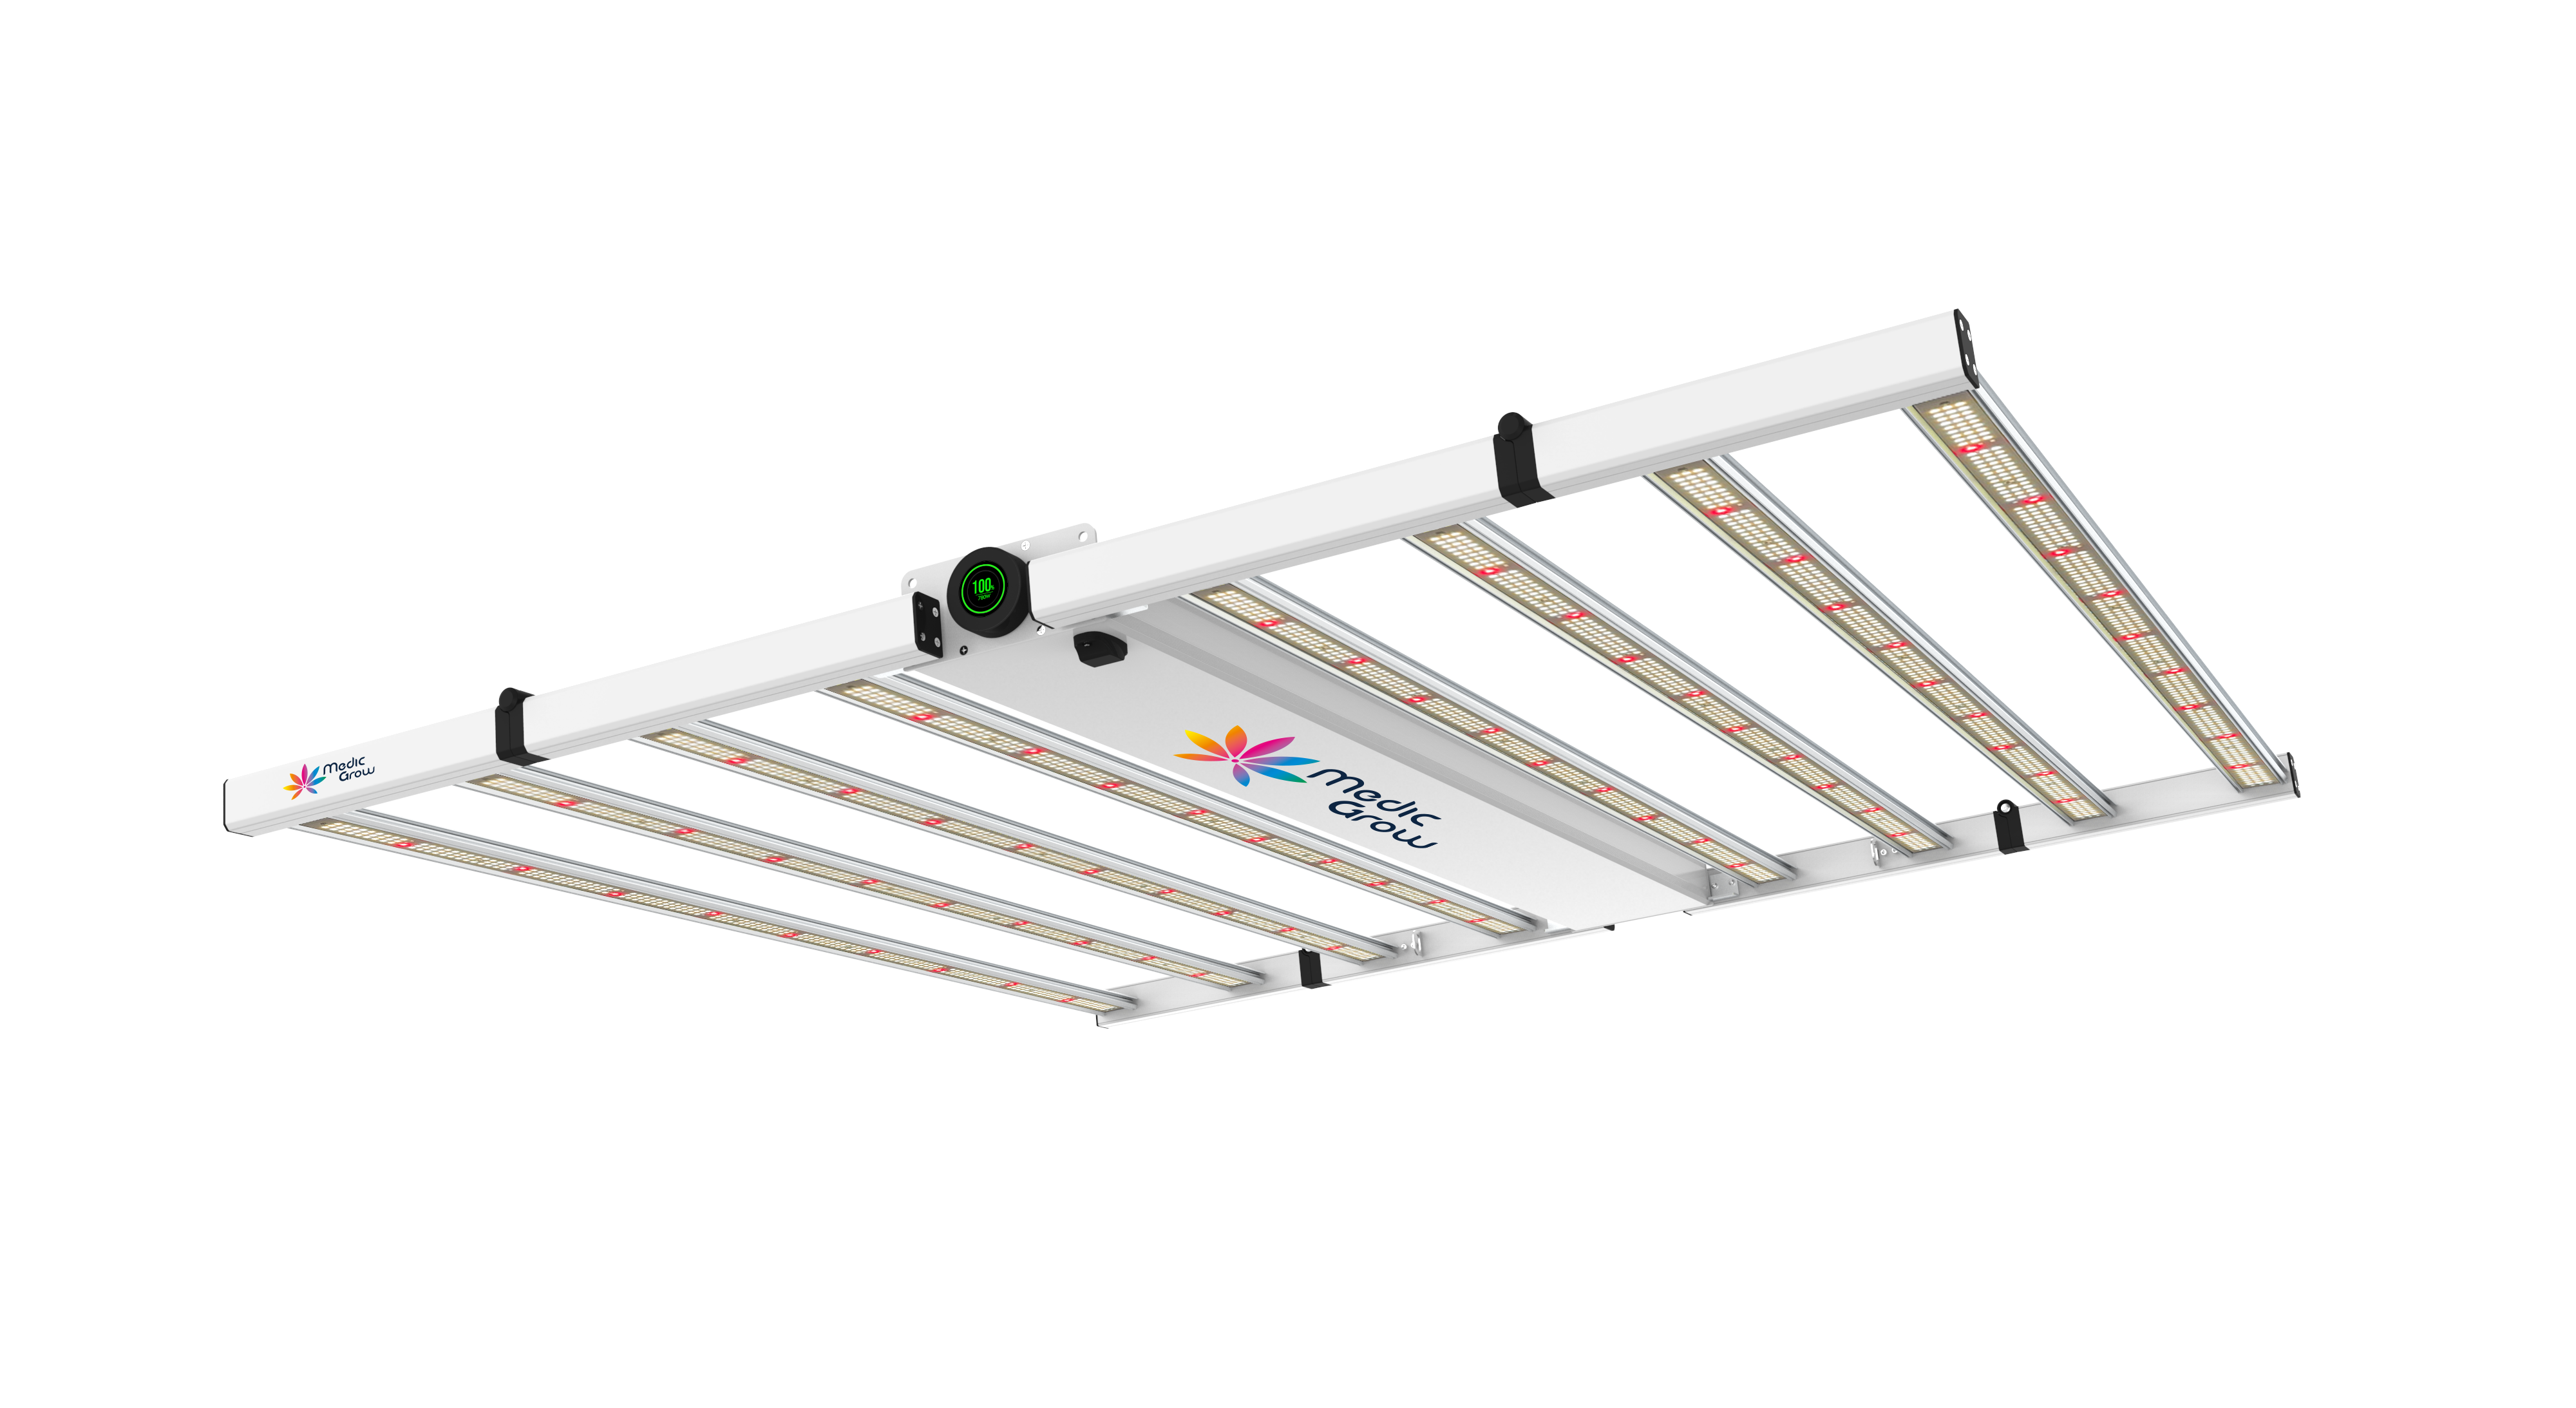 Medic grow NEO-780 Full Spectrum LED Grow Light for Indoor Plants - 780W, covers 4x4 5x5, high PPFD, WIFI Daisy Chain, AC 110-270V